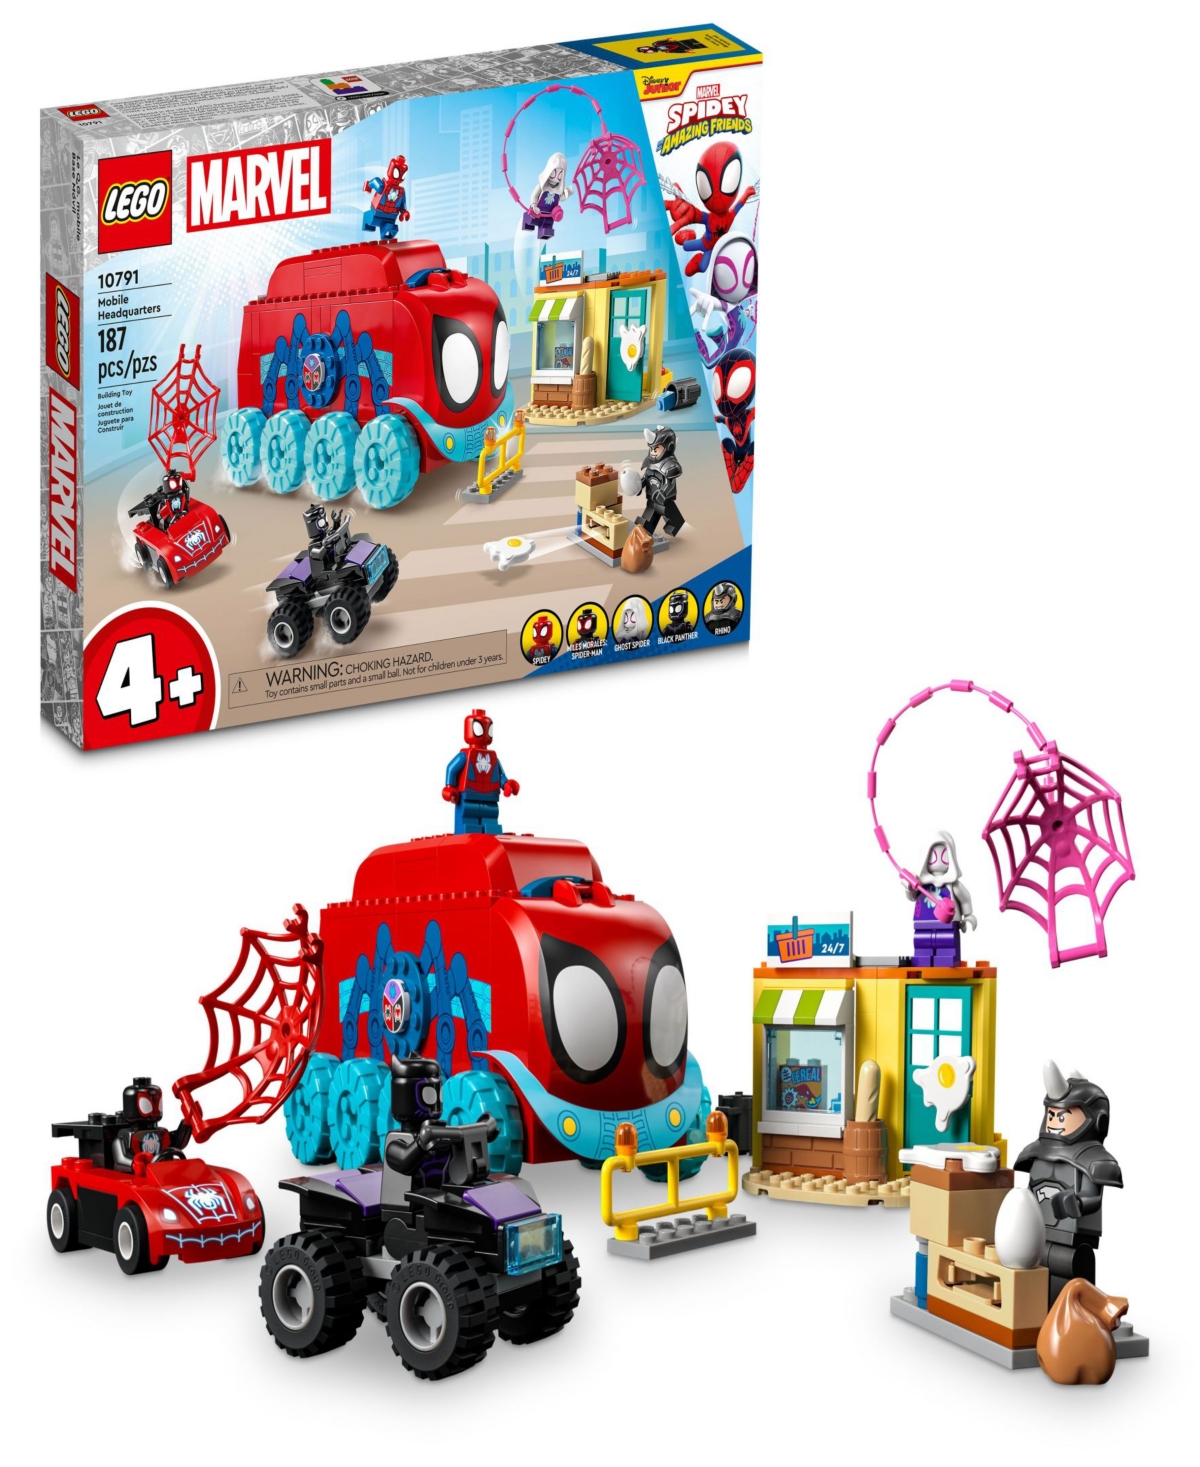 Lego Spidey 10791 Marvel Team Spidey's Mobile Headquarters Toy Building Set With Car And Character Minifi In Multicolor